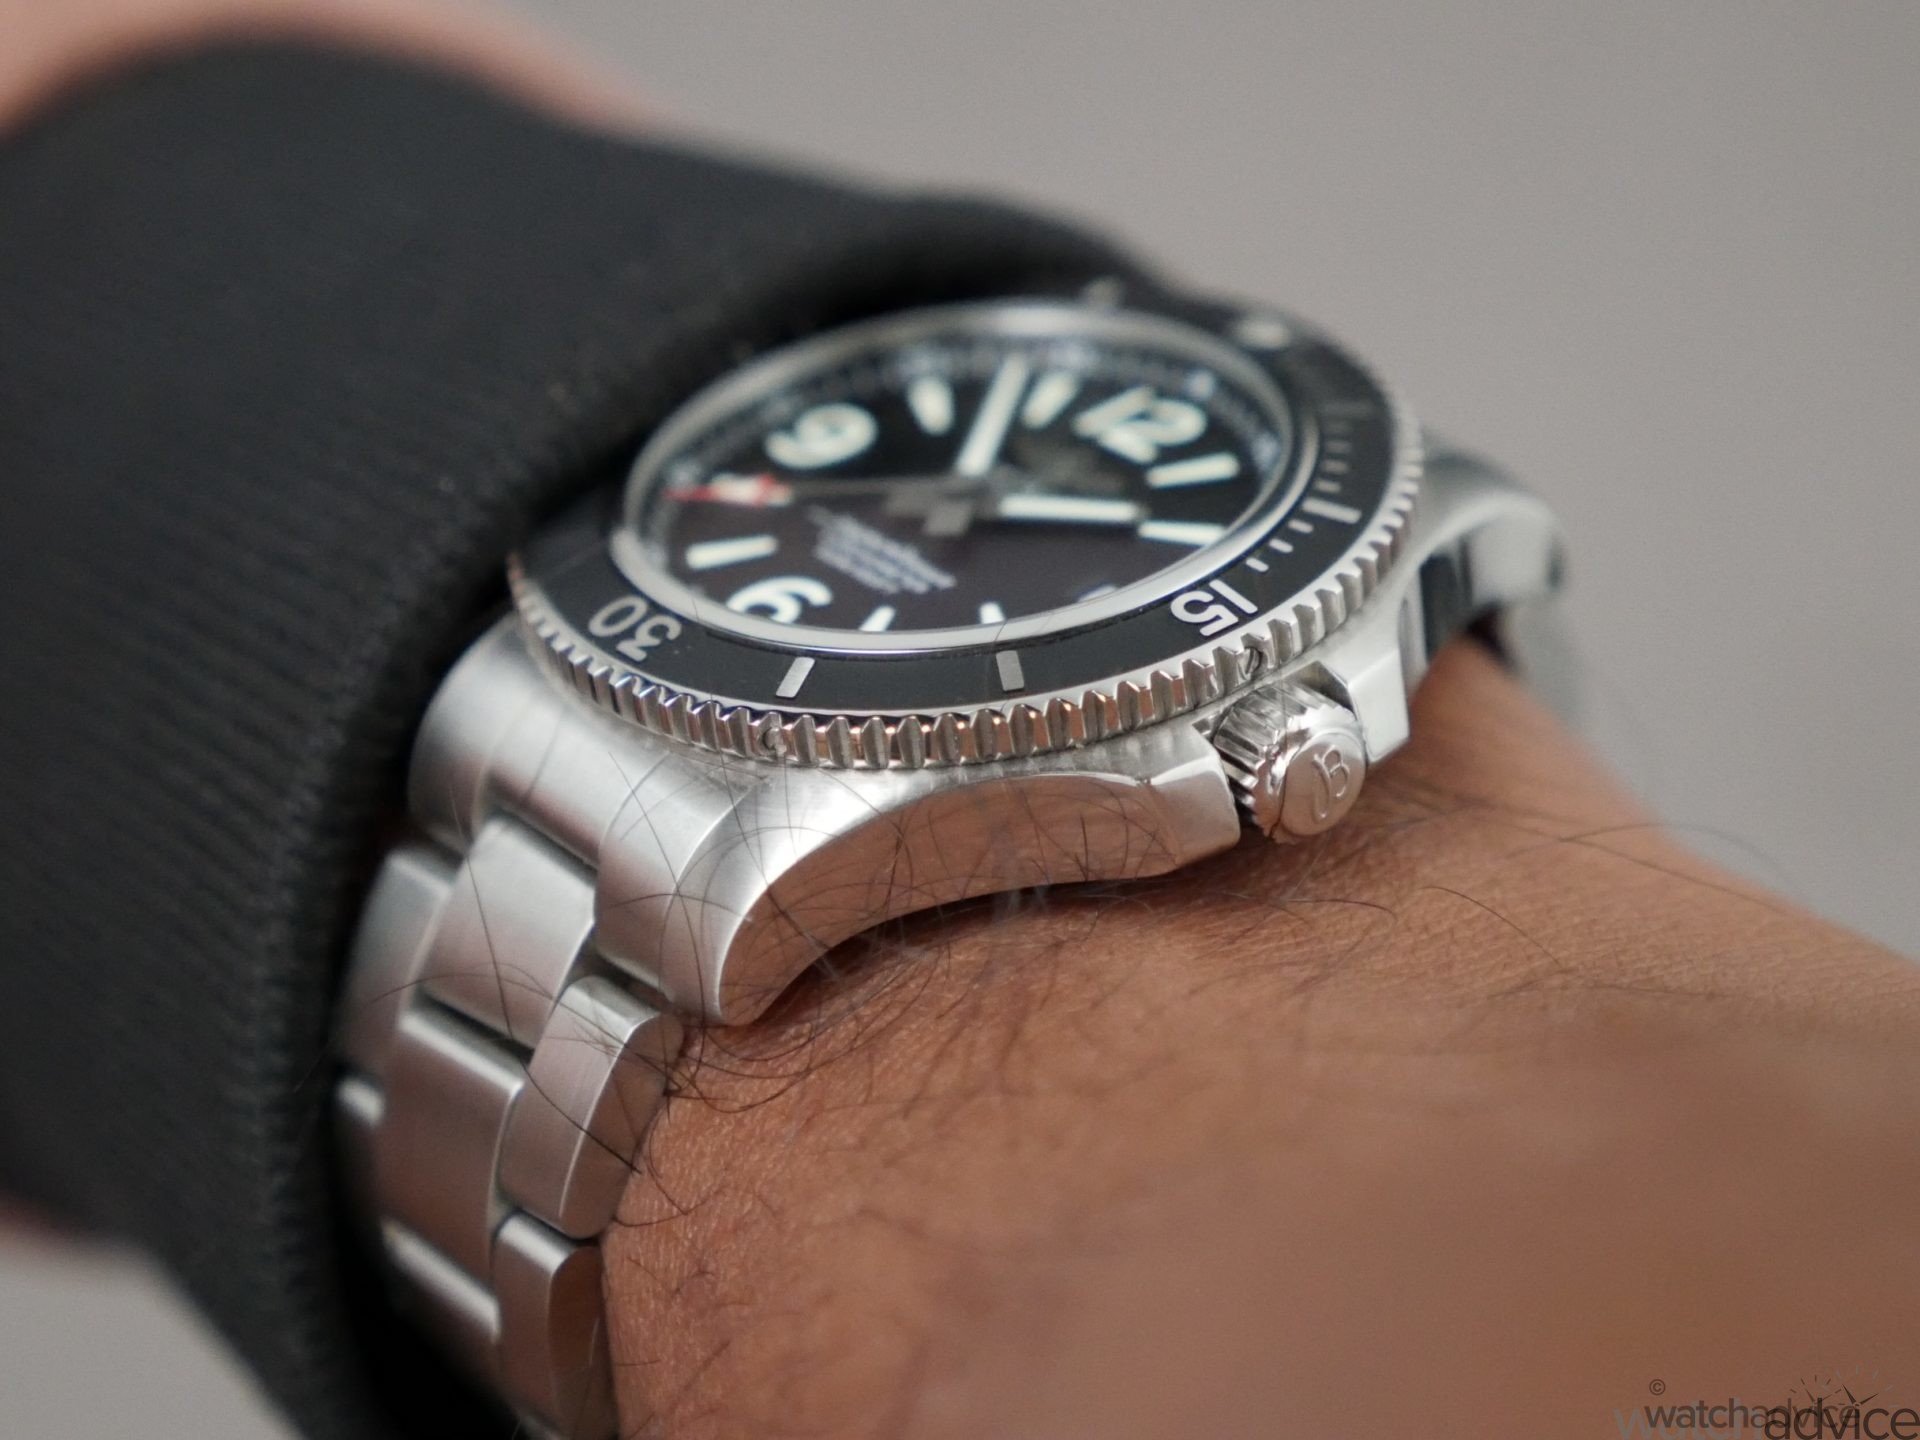 Breitling Superocean Automatic 42 Review – Watch Advice